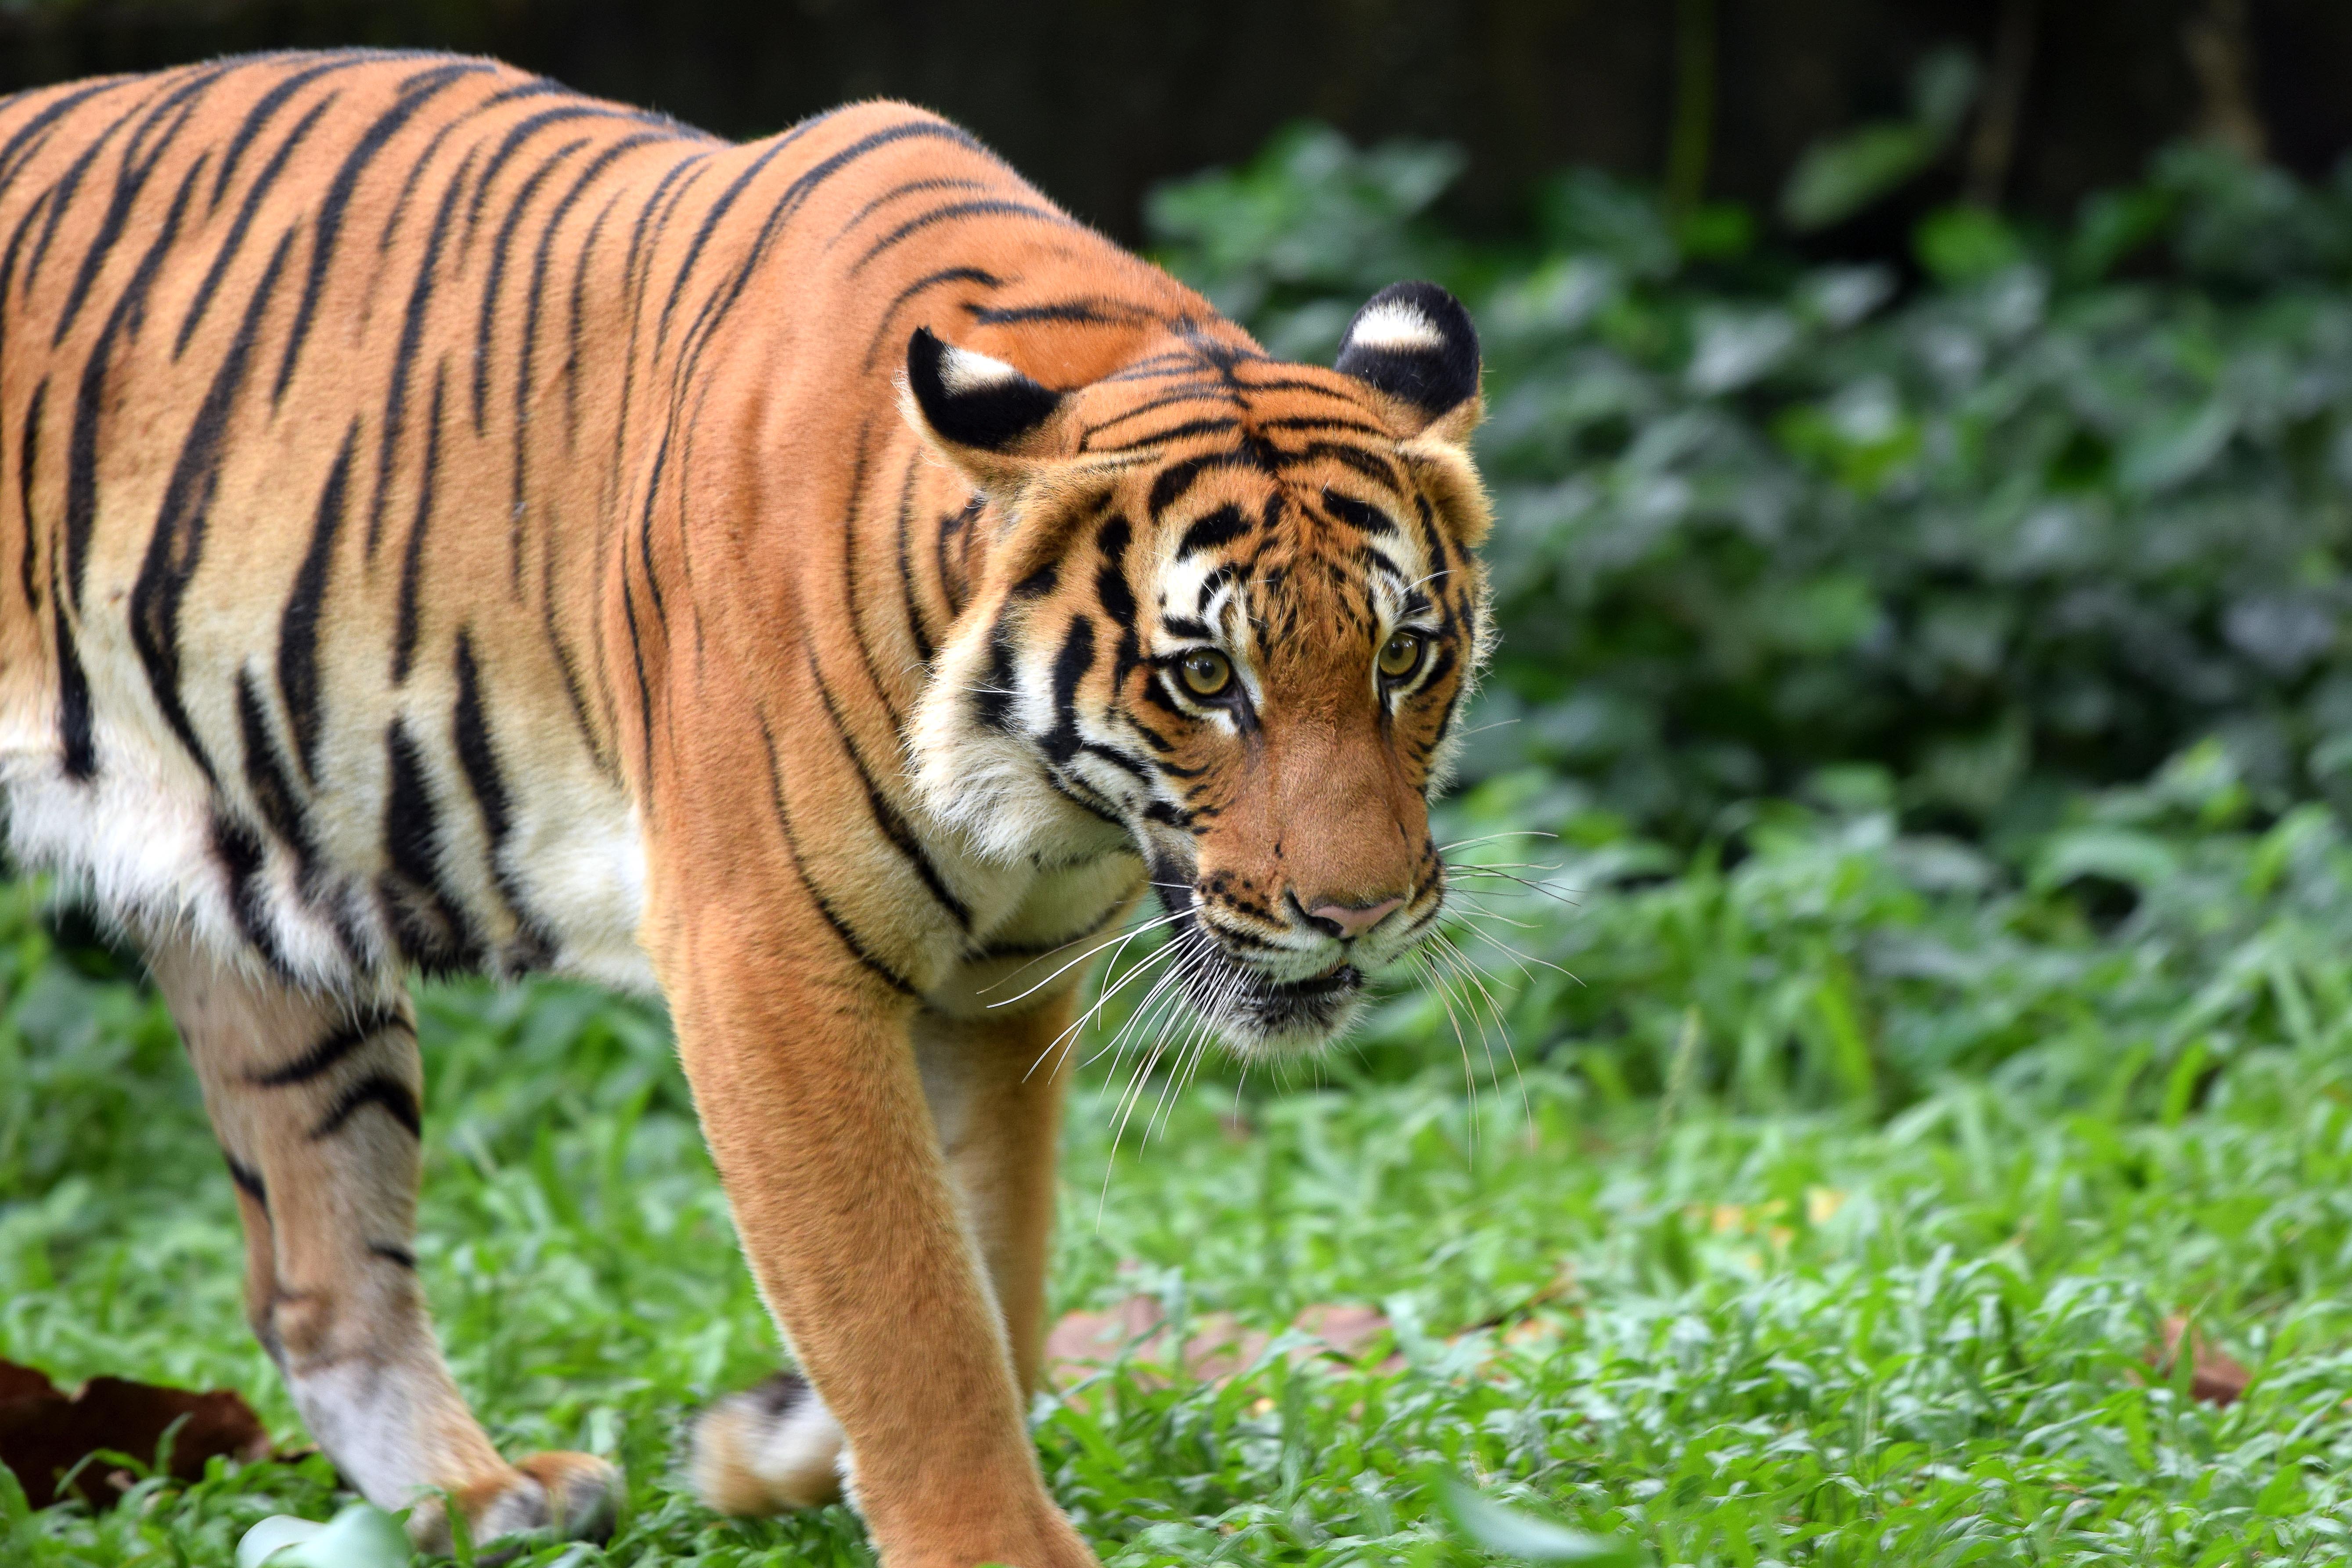 A healthy Malayan Tiger found in the Malaysian rainforest - (c) WWF-Malaysia_Shariff Mohamad